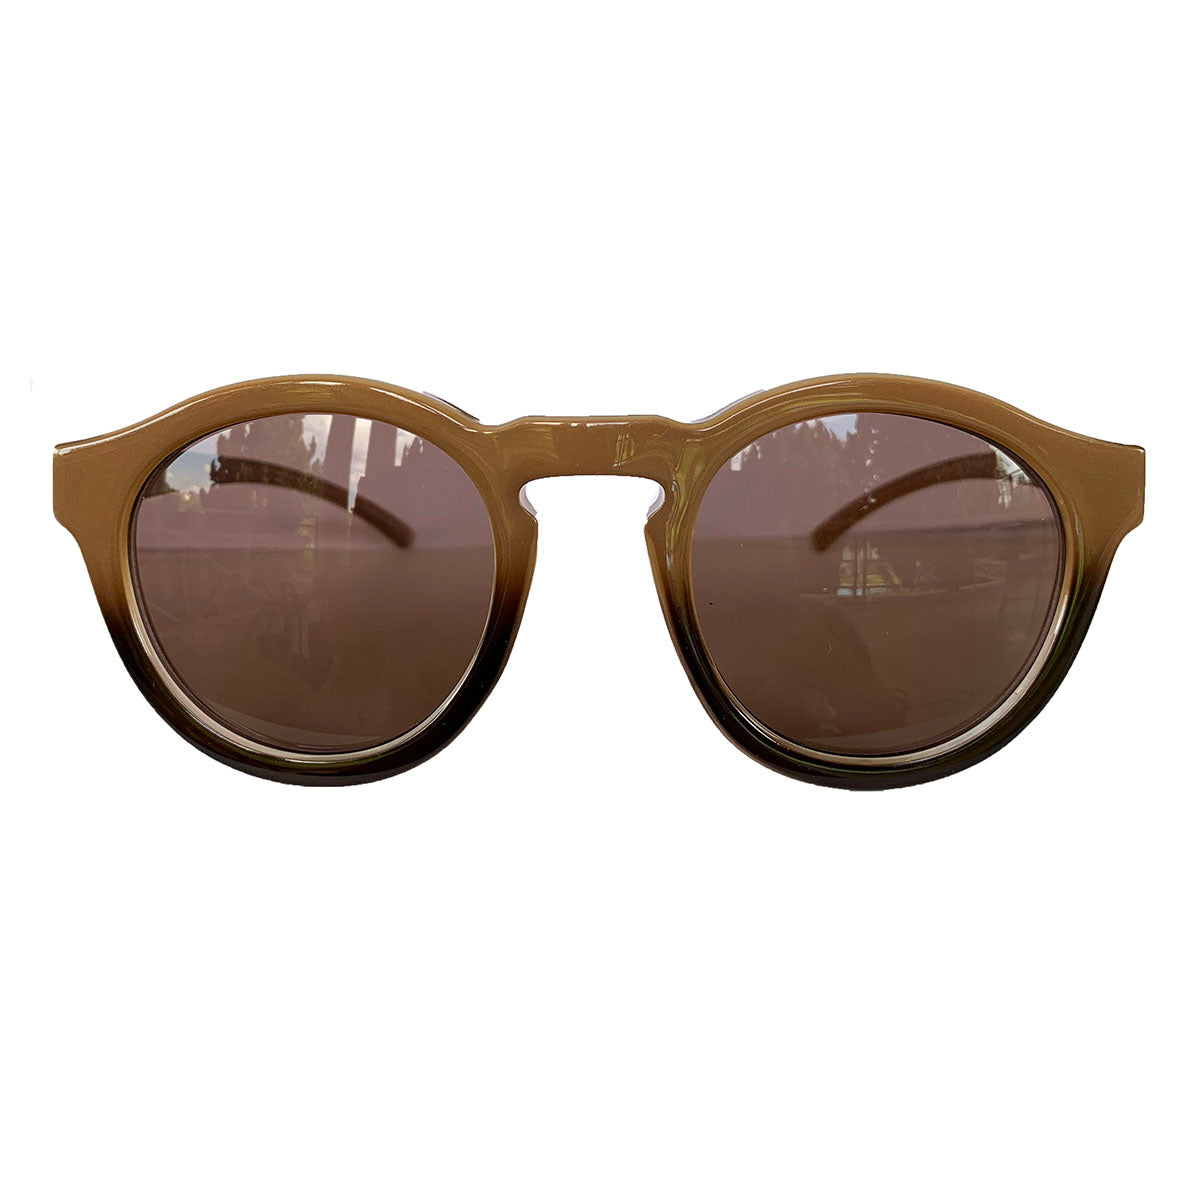 Round Nude and Brown Coloured Sunglasses w/ Hazel Lenses